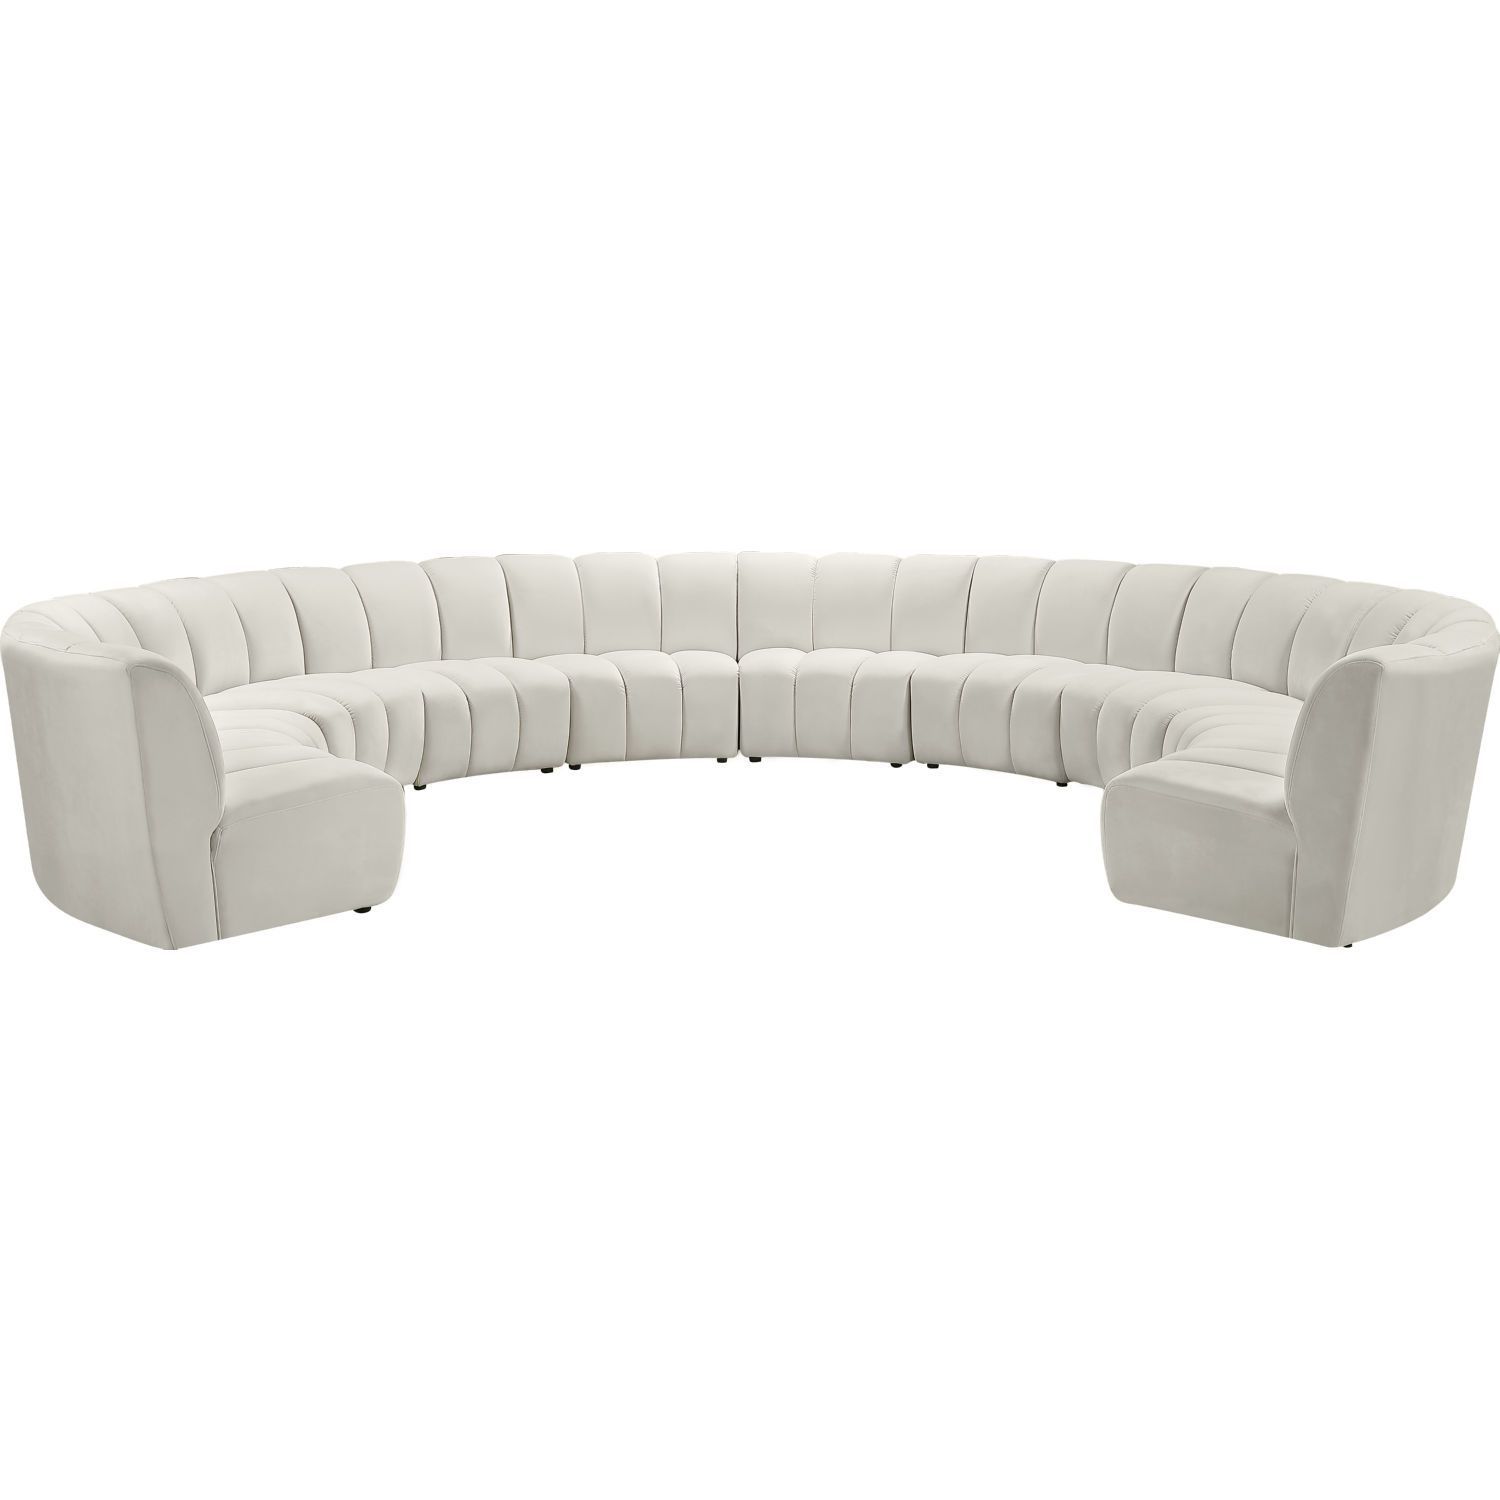 Meridian Furniture 638cream 10pc Infinity 10 Piece Modular Sectional Pertaining To Cream Velvet Modular Sectionals (Gallery 14 of 20)